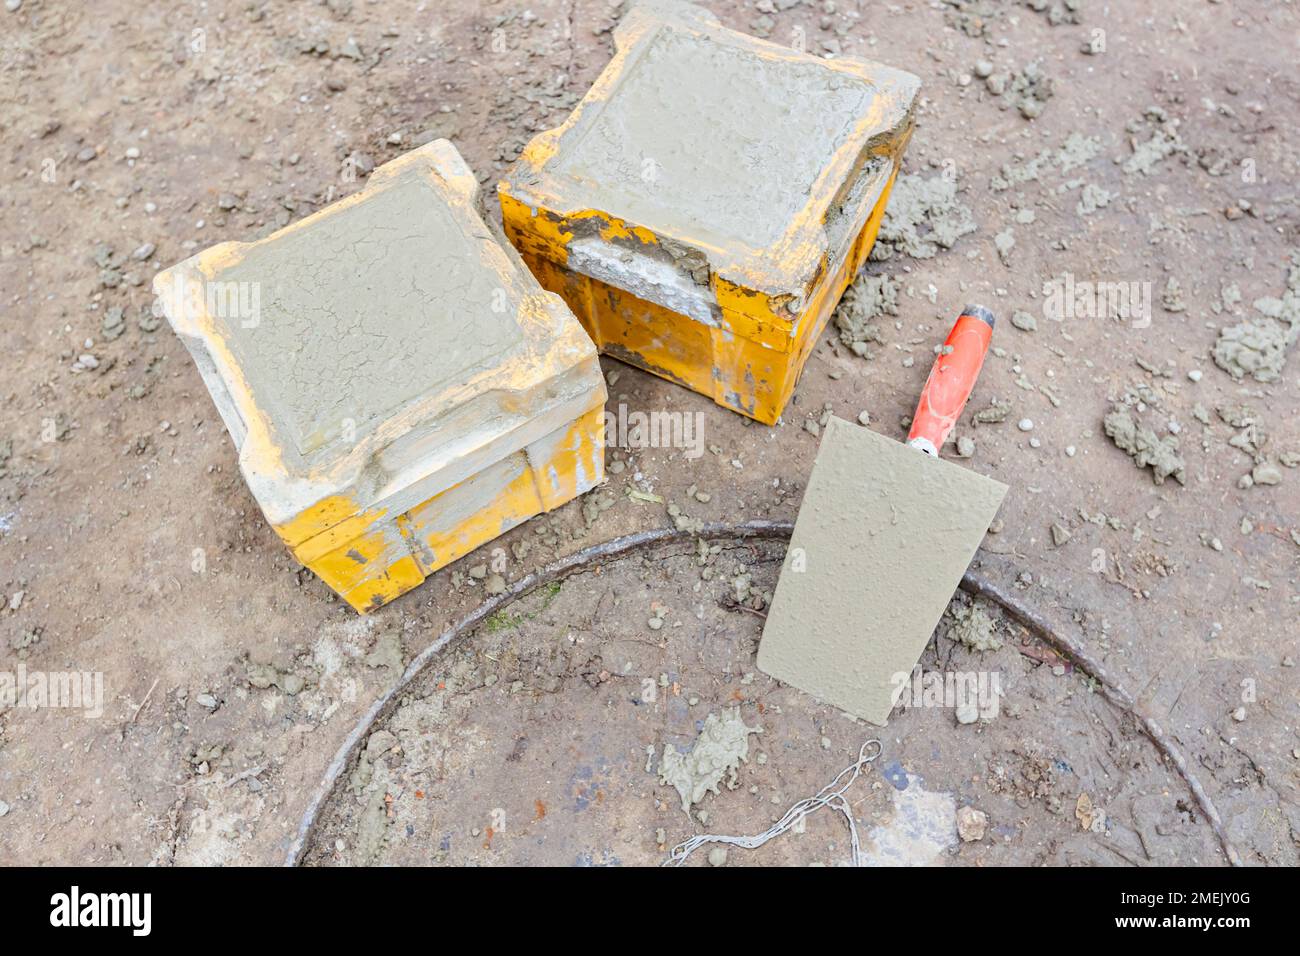 Two cube molds full with concrete, samples for the tensile or flexural testing and compressive strength test of the cement mixture casting building fo Stock Photo